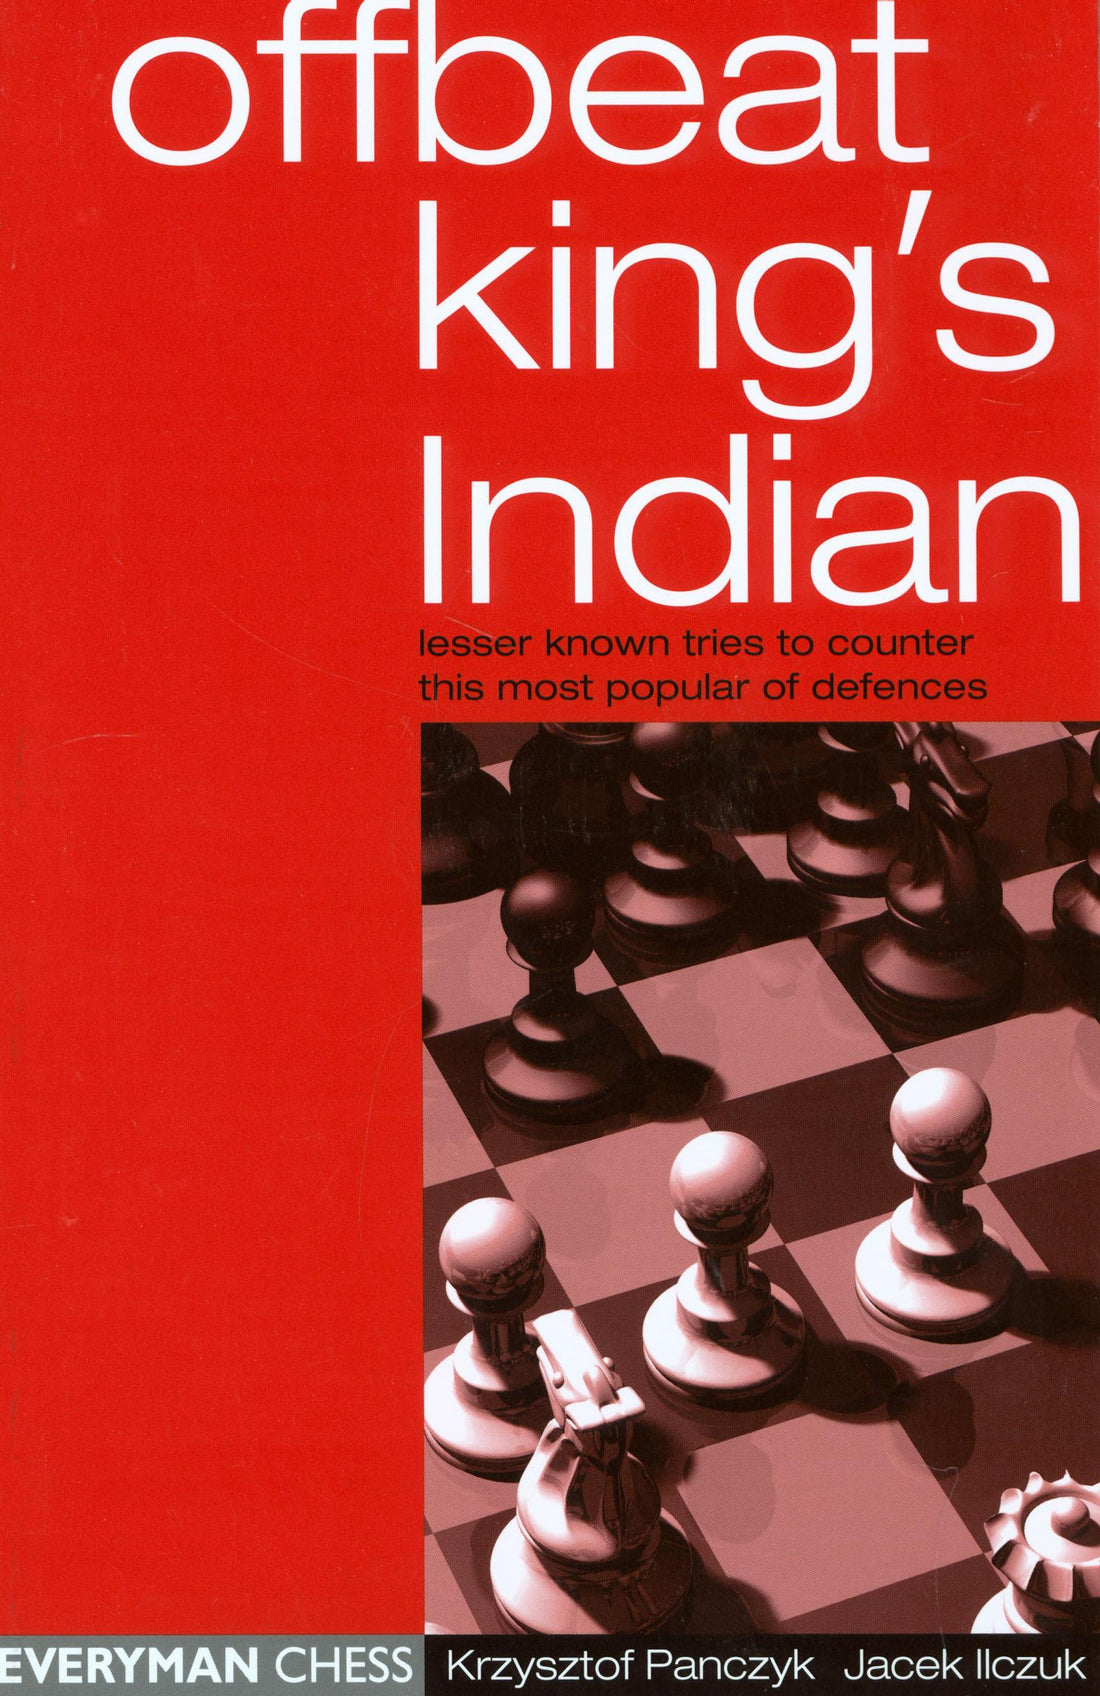 The Offbeat King's Indian front cover